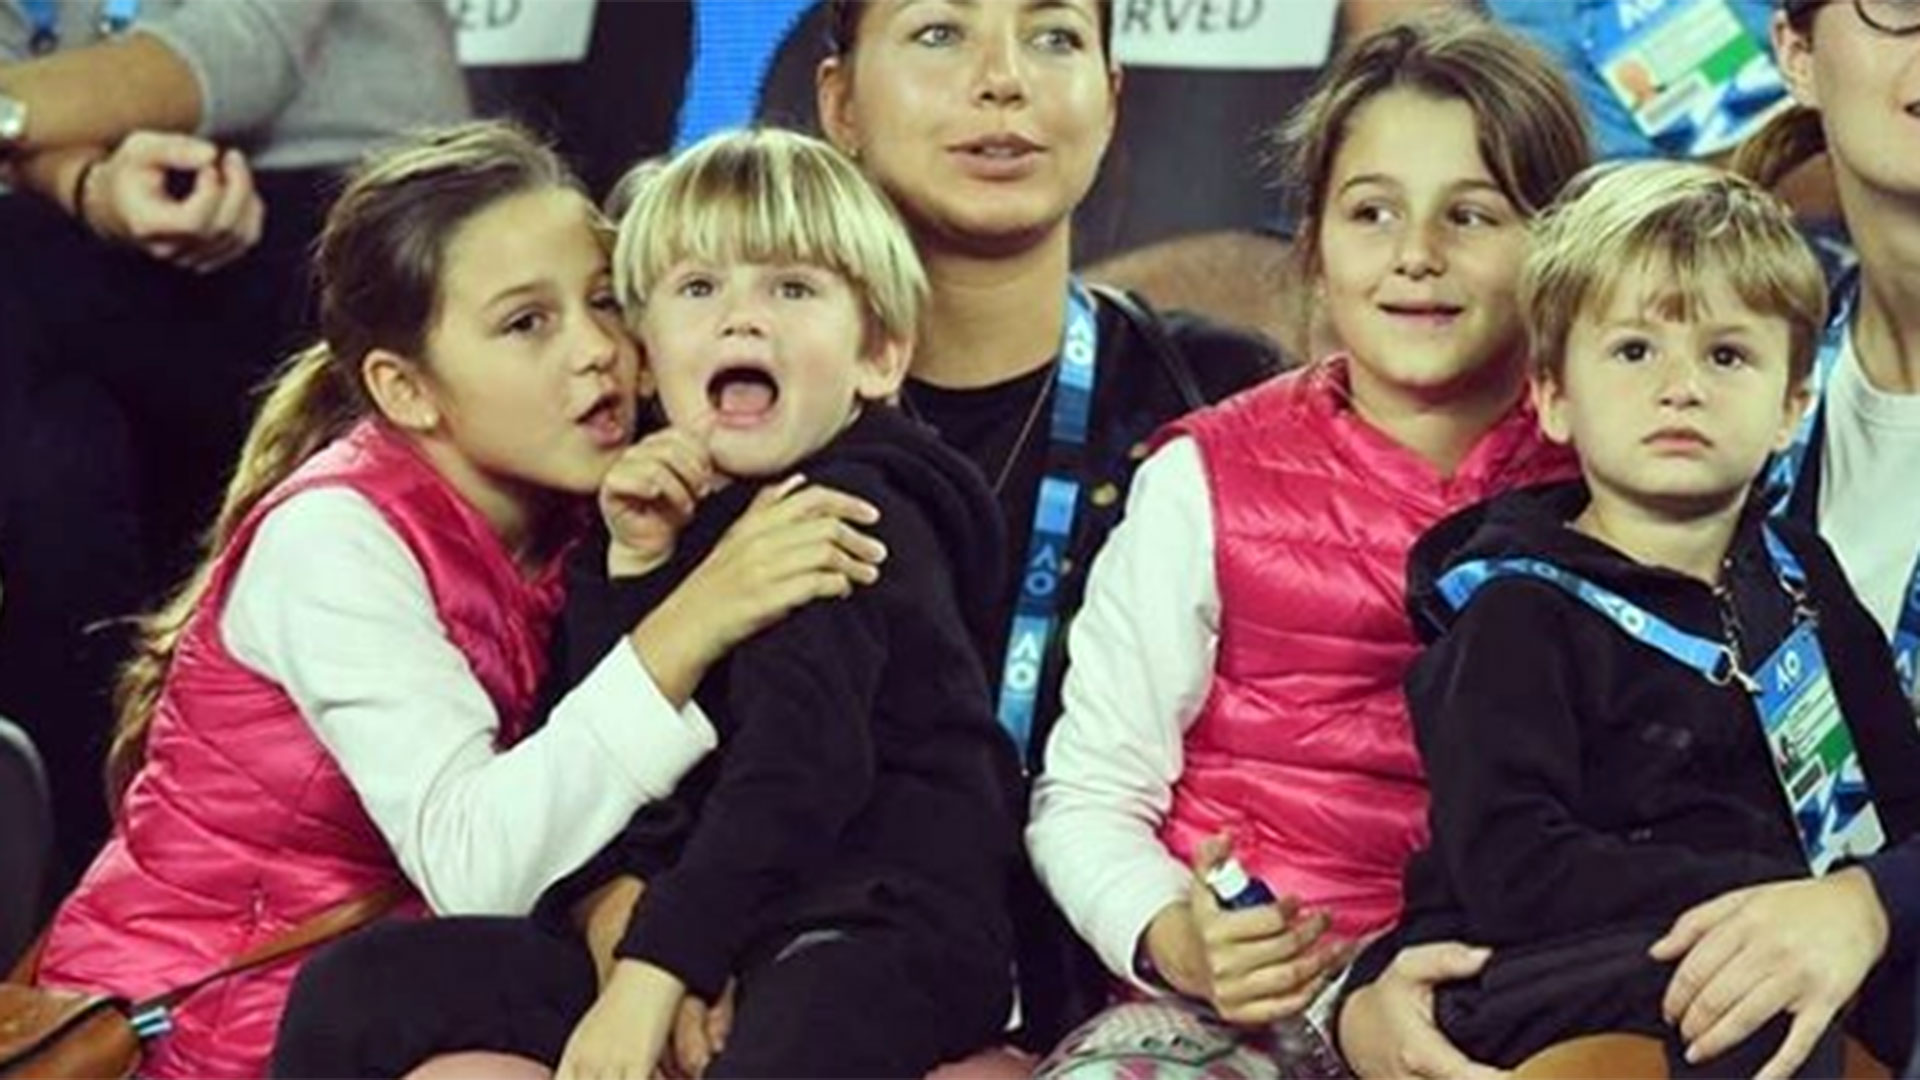 The four children from the marriage of Federer and Vavrinec 